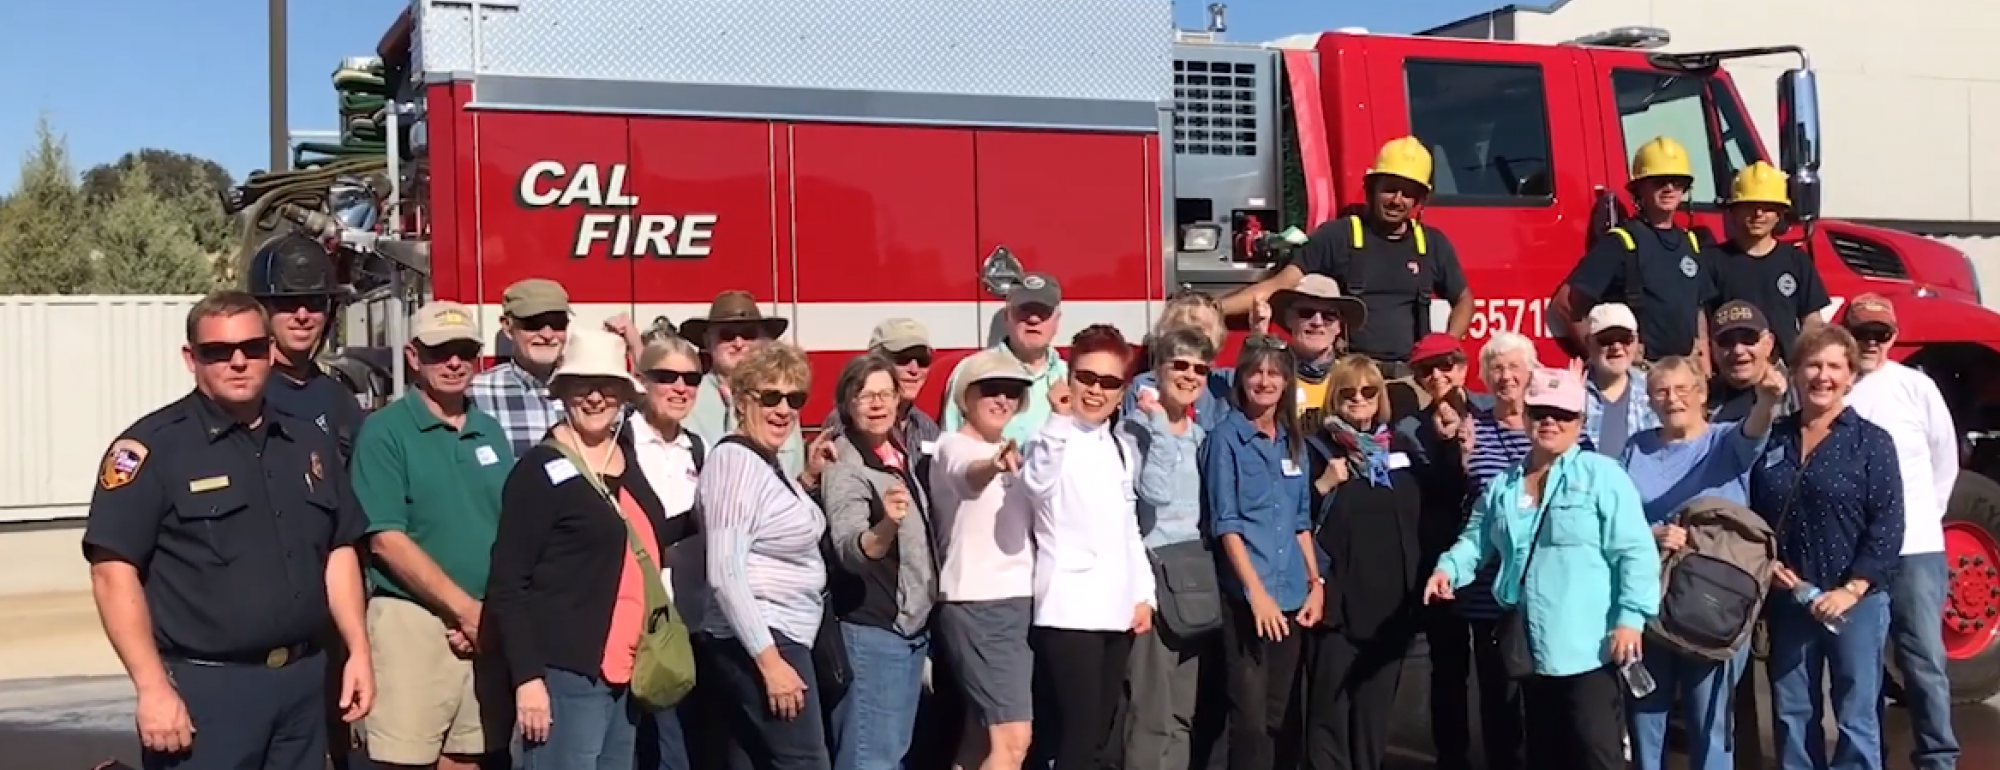 OLLI members on a field trip to Cal Fire